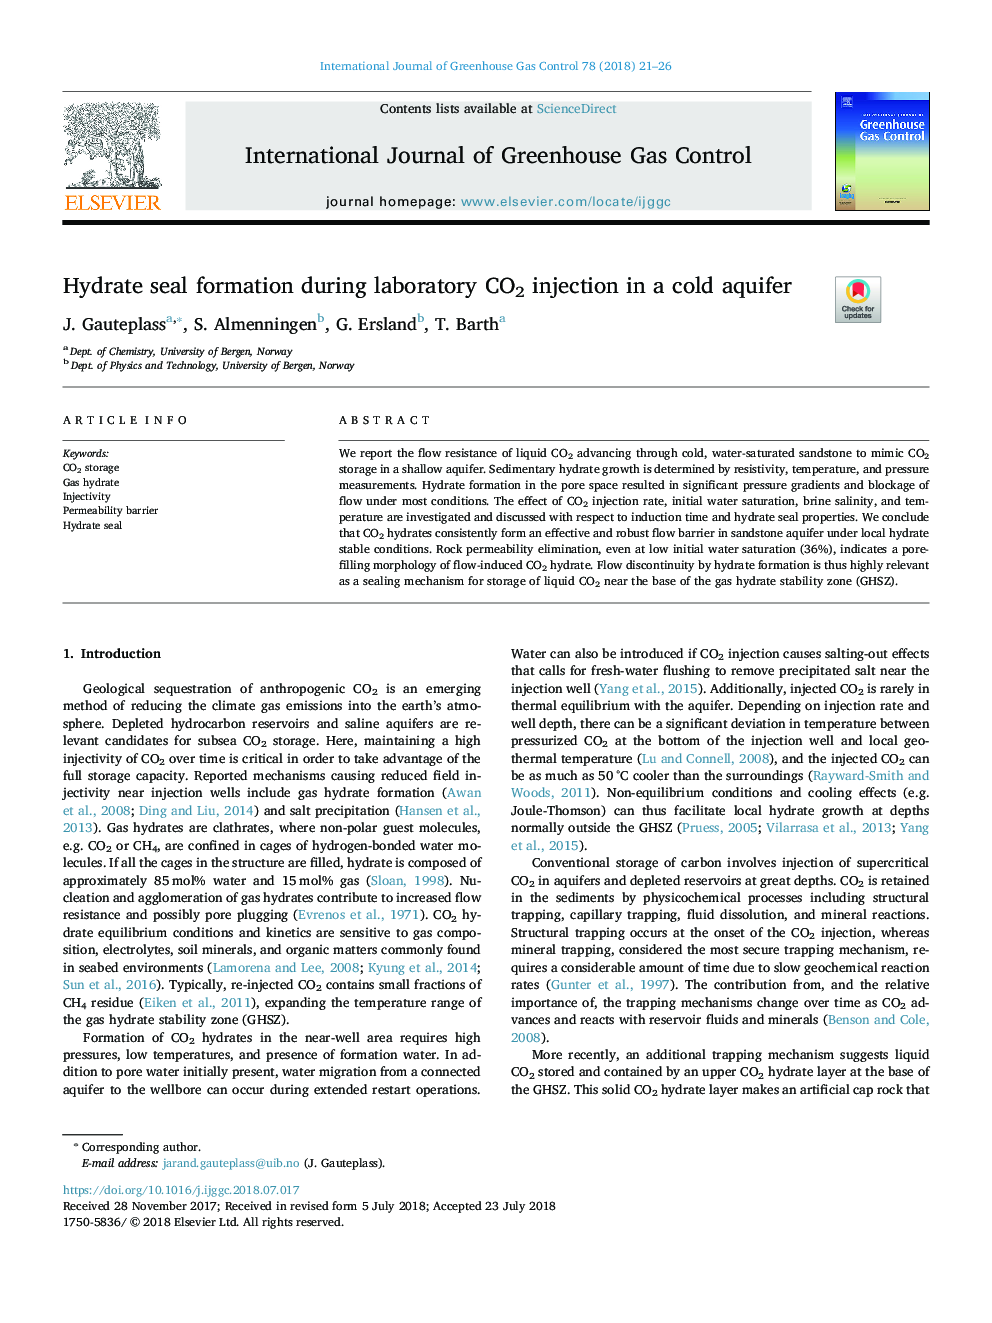 Hydrate seal formation during laboratory CO2 injection in a cold aquifer